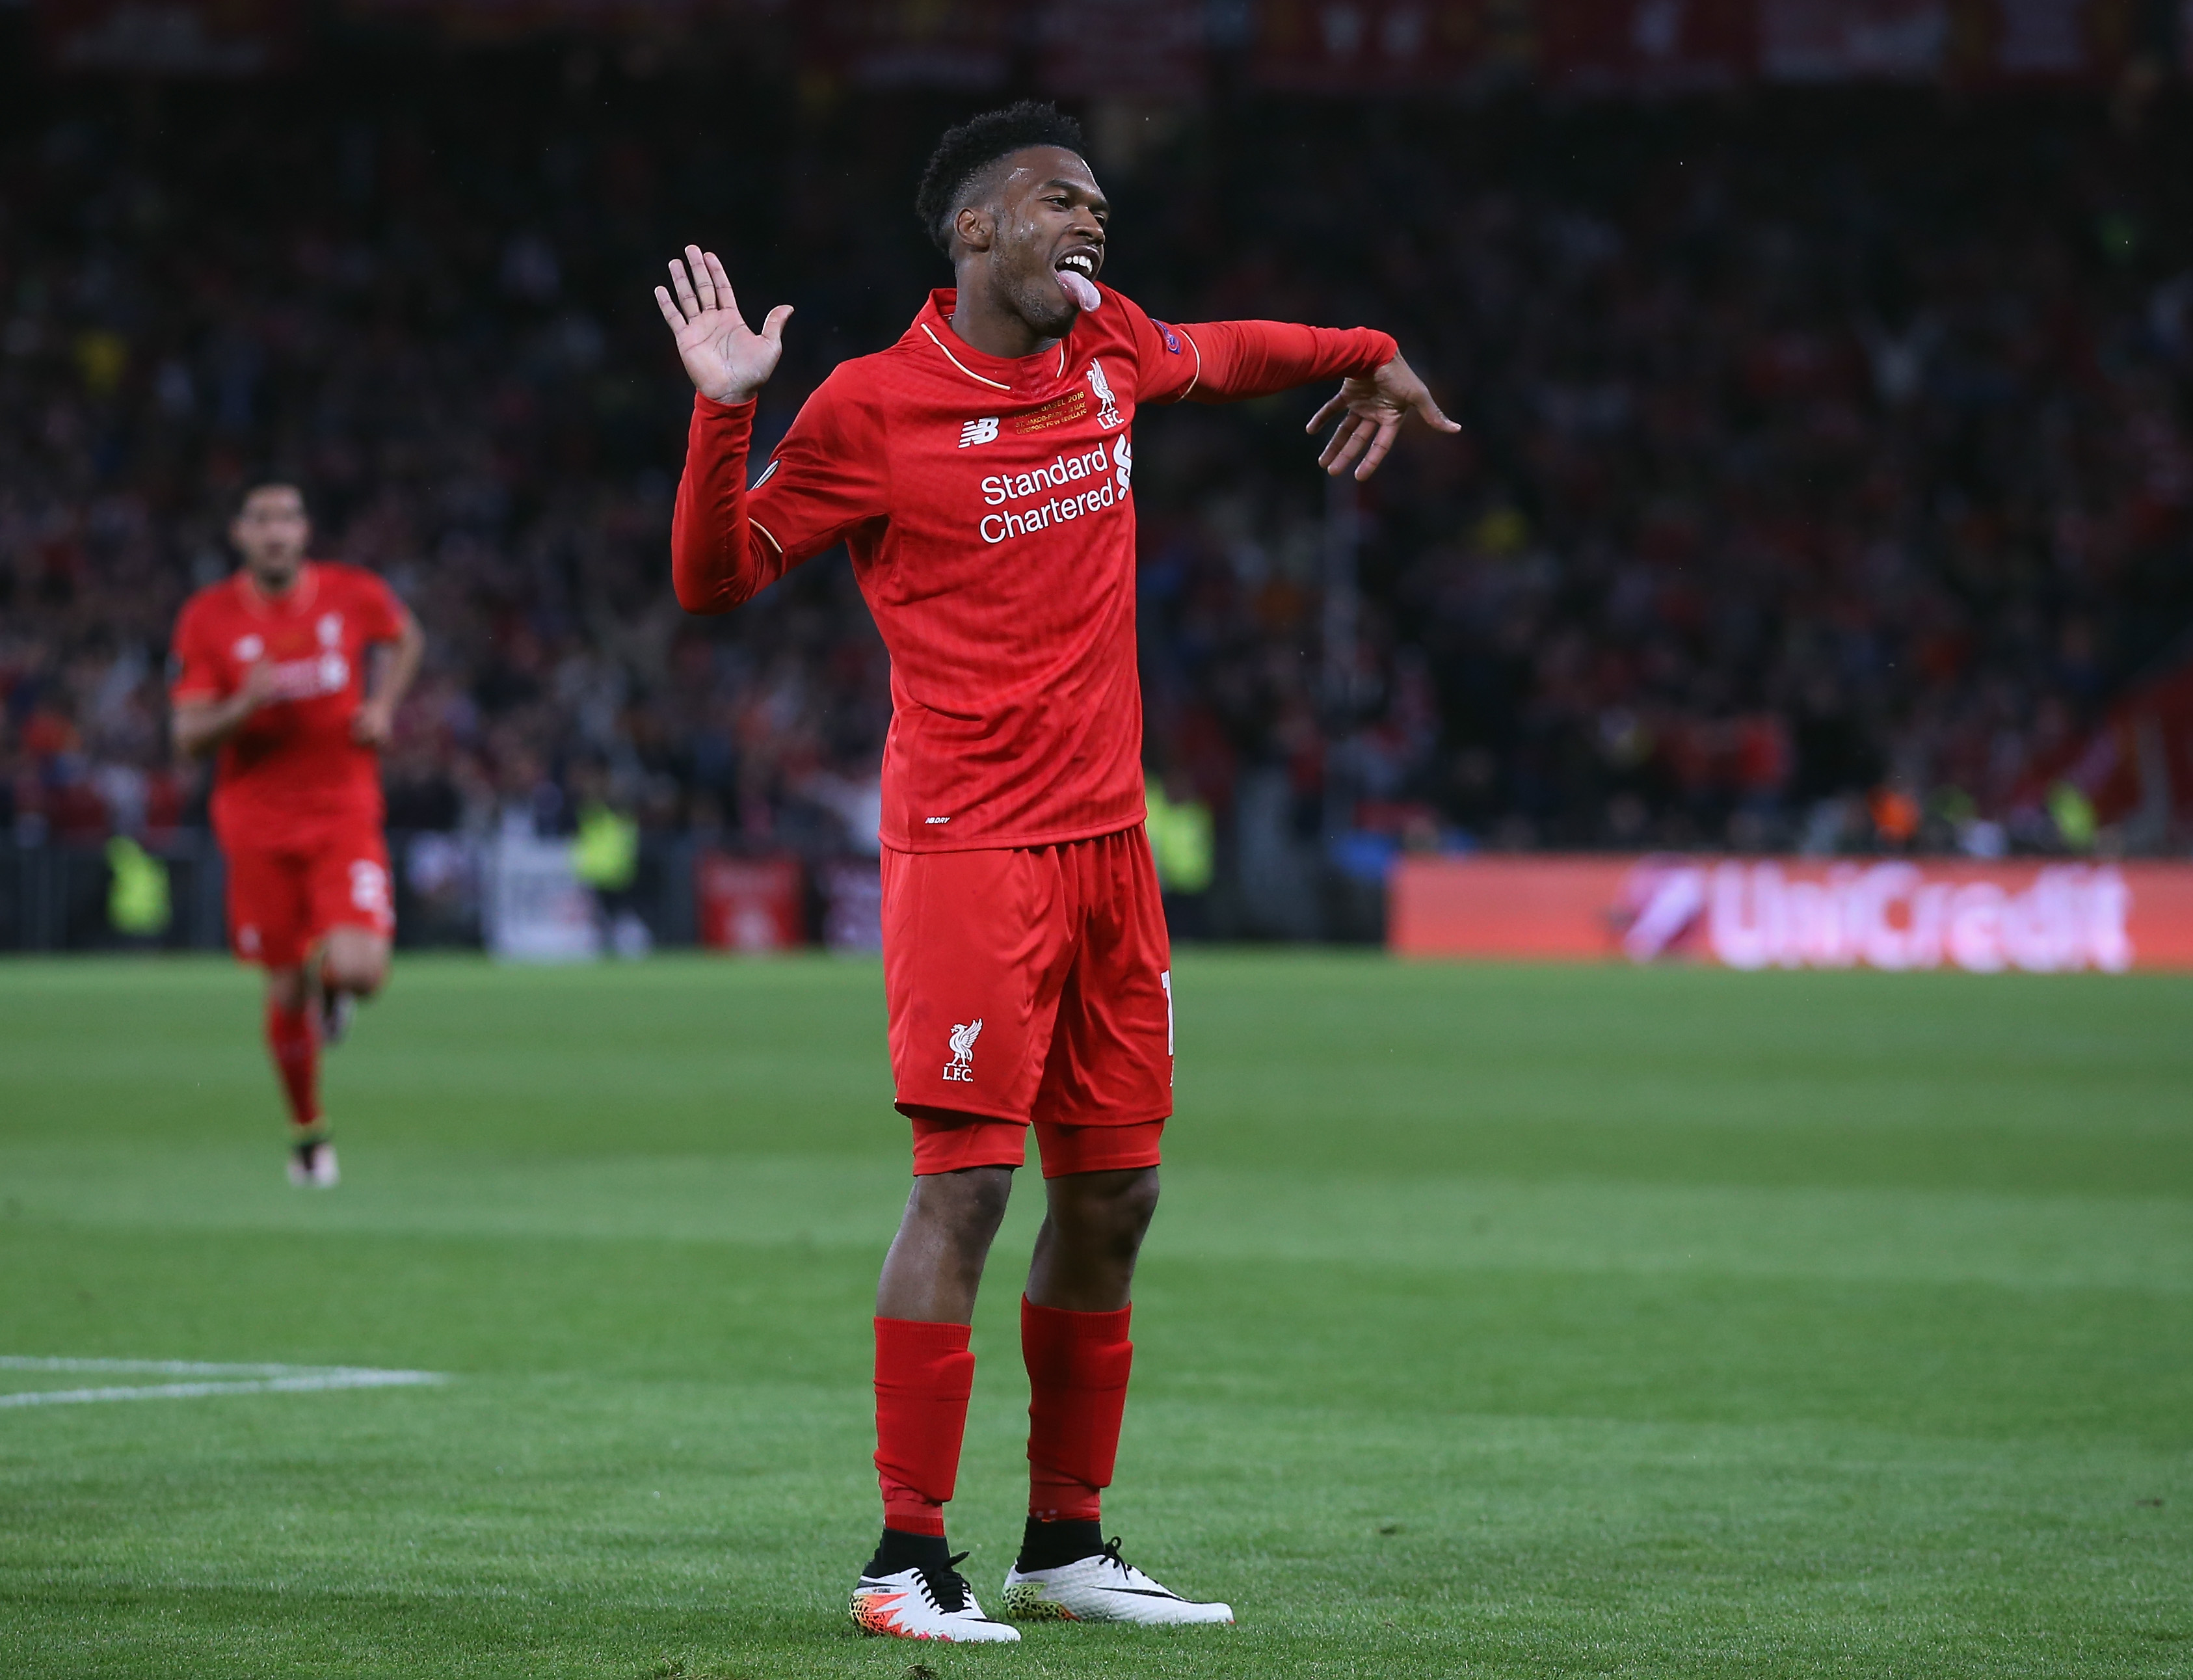 Sturridge is a quality striker, but does he work hards enough defensively? (Photo courtesy Lars Baron/Getty Images)